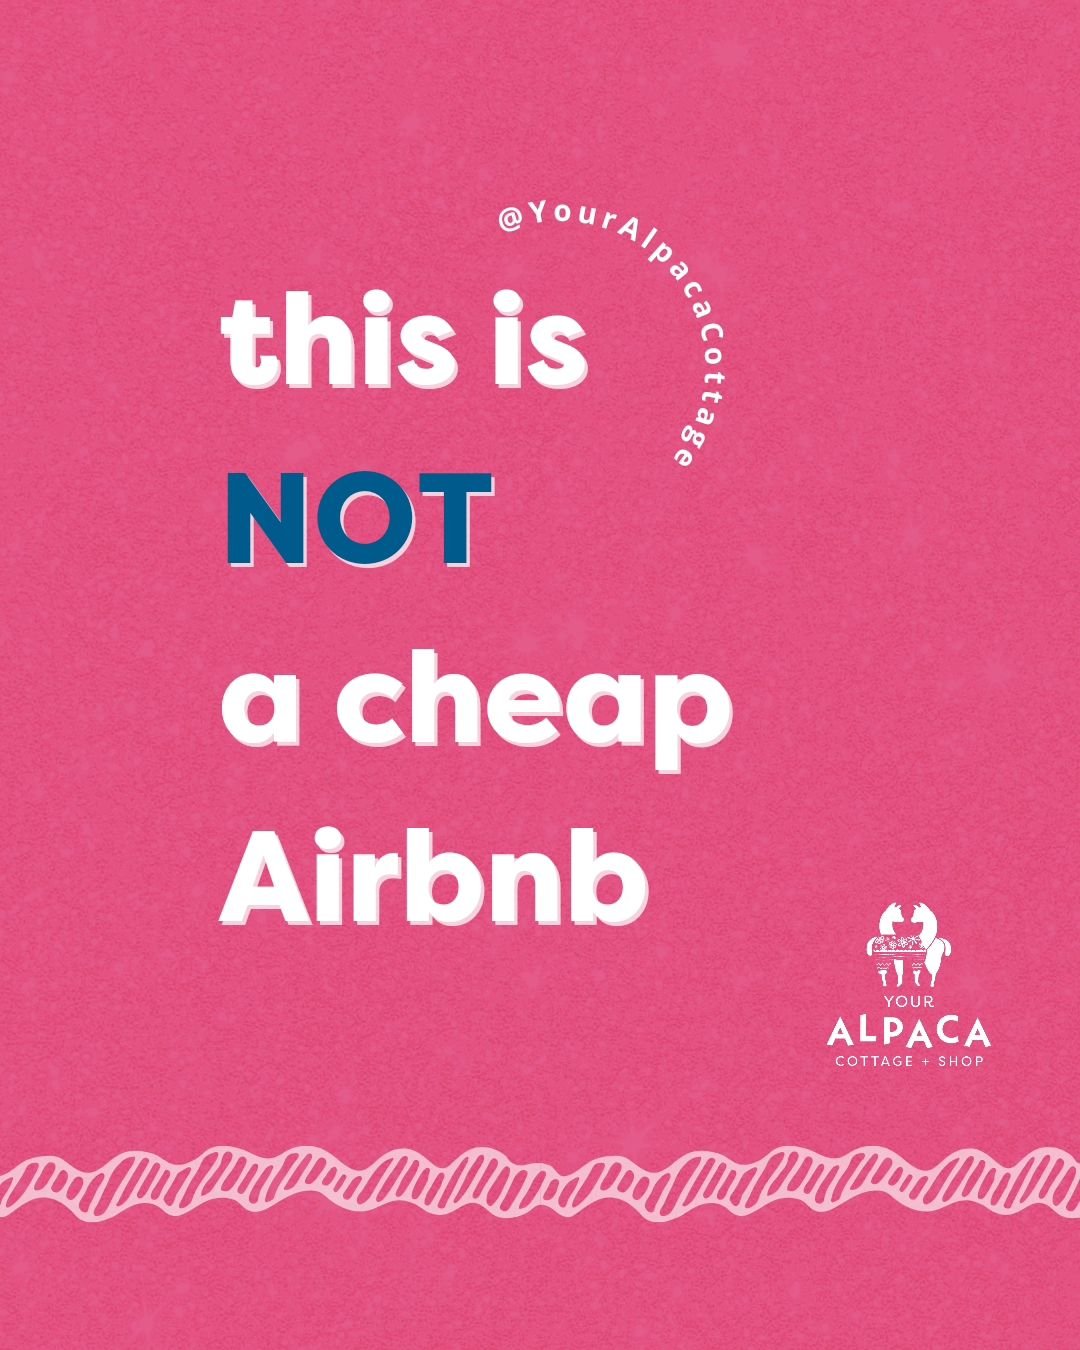 I make no apologies about not being a cheap Airbnb because Your Alpaca Cottage is not a place to crash for the night; it's an unforgettable experience that's never been about cutting corners. 👇🏼

At Your Alpaca Cottage, I host with heart &amp; gene